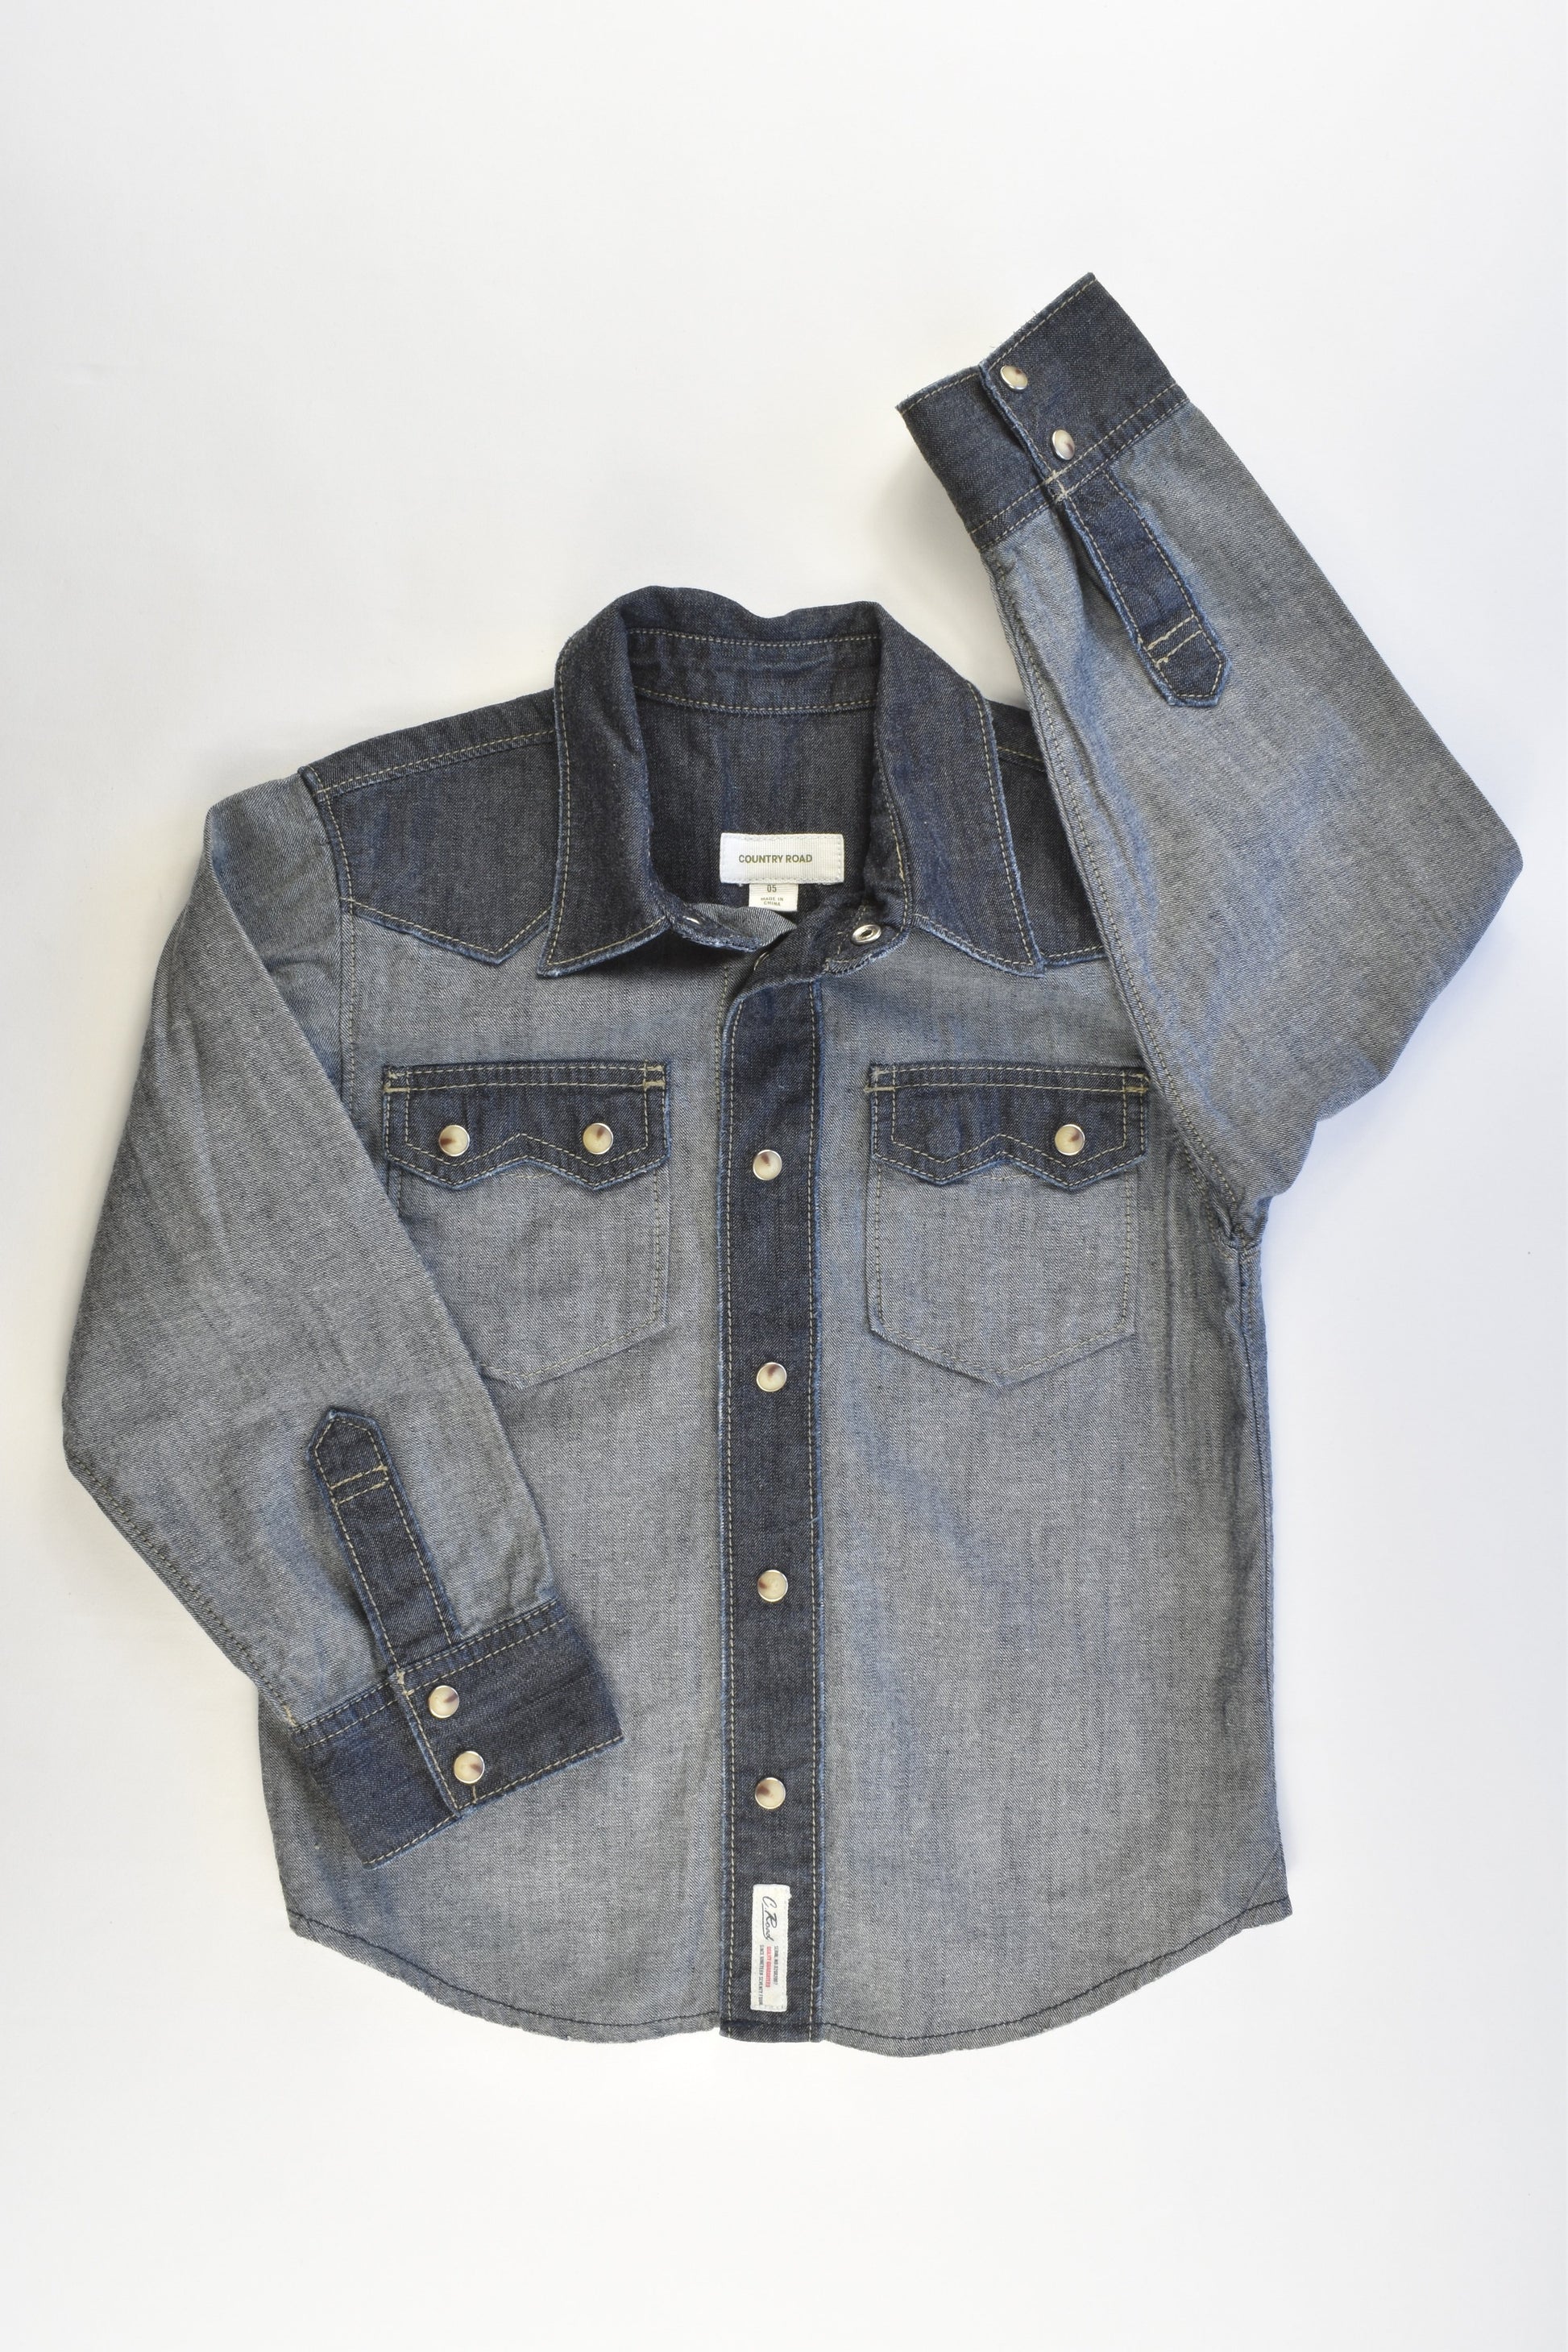 Country Road Size 5 Denim Shirt